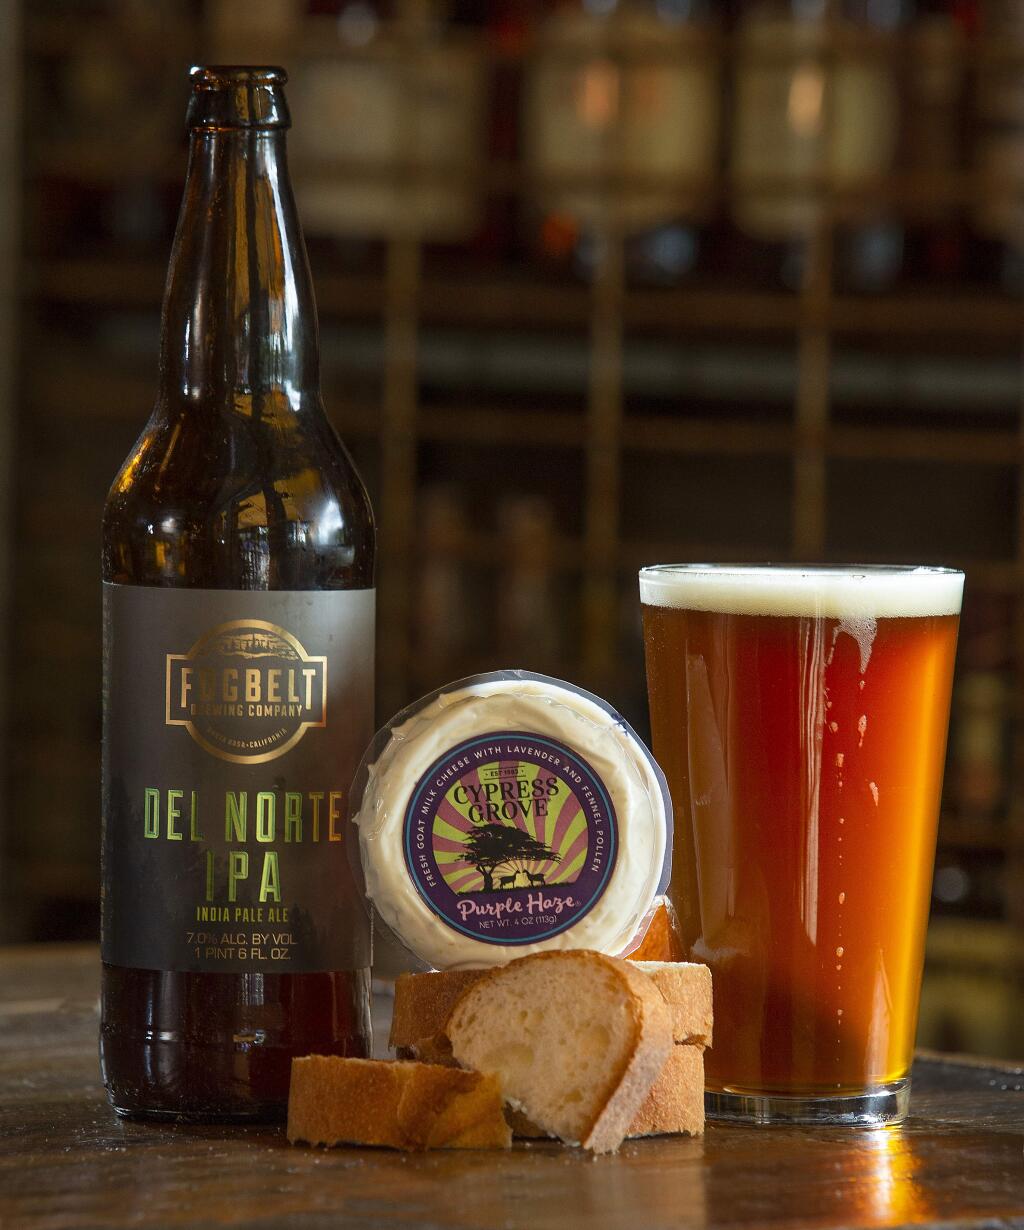 Fogbelt Brewing Co. owner Paul Hawley likes their Del Norte IPA with Cypress Grove's Purple Haze goat cheese with lavender and fennel. (photo by John Burgess/The Press Democrat)